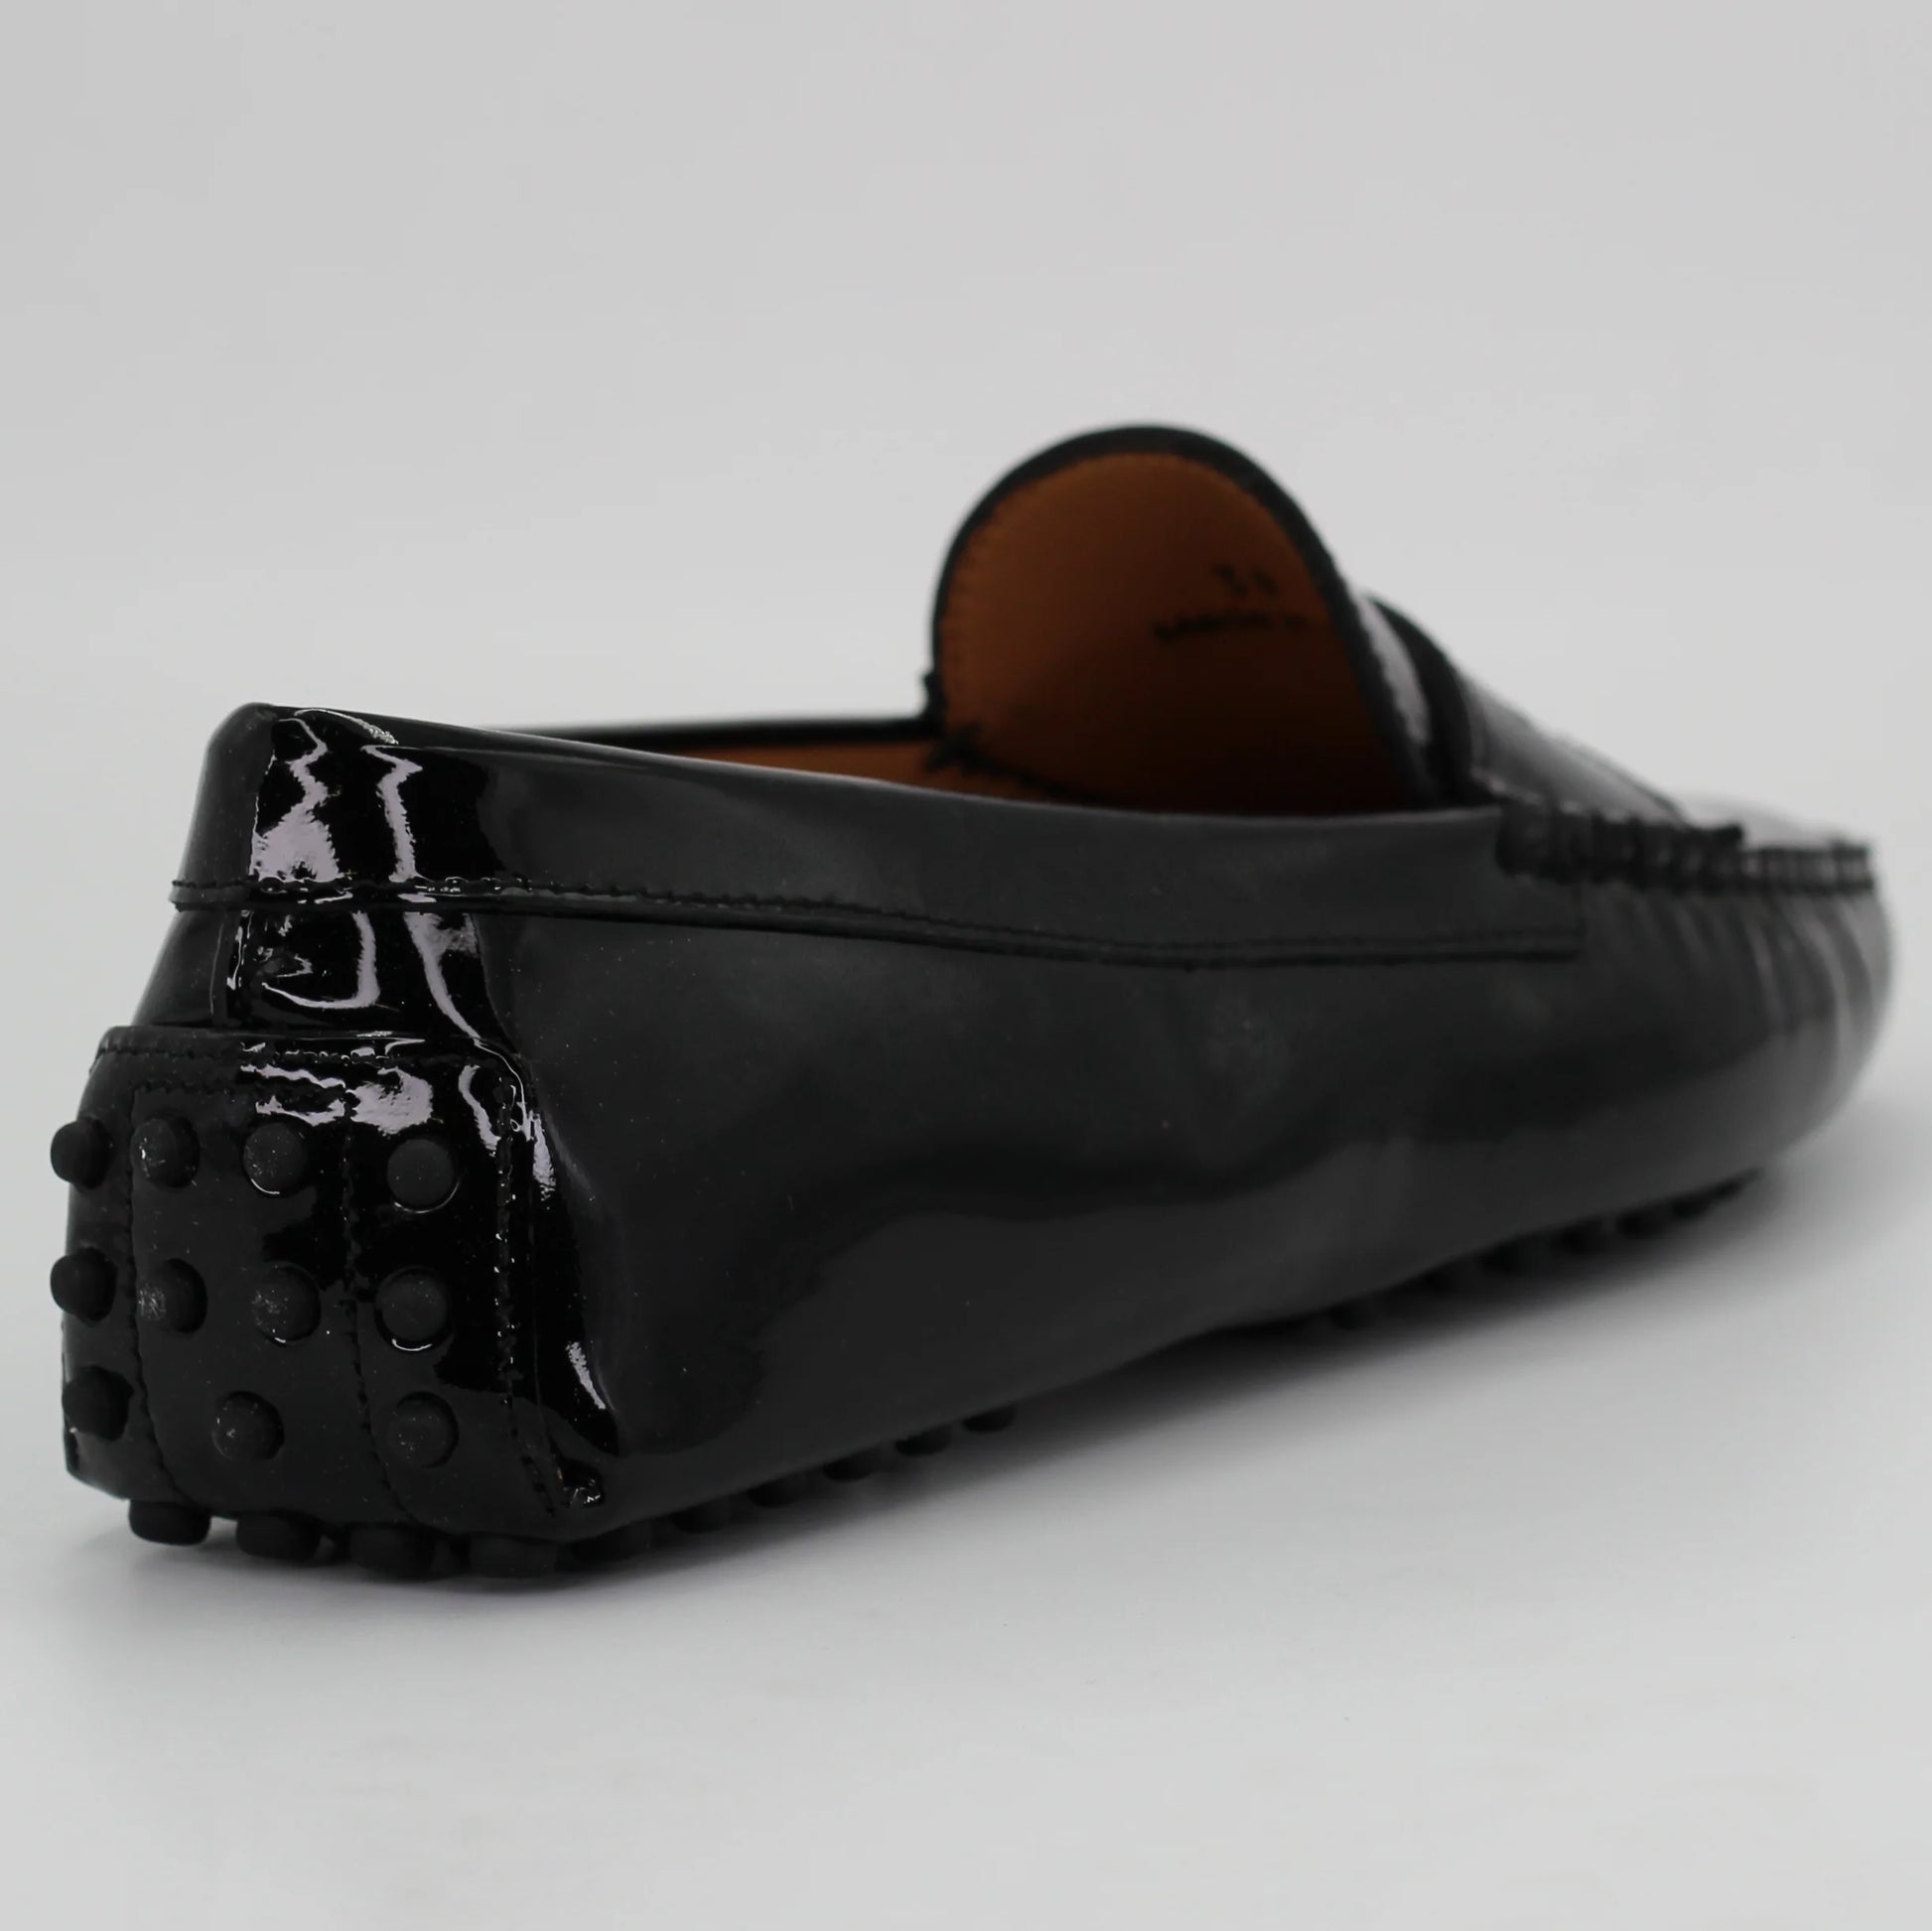 Shop Handmade Italian Leather moccasin in black (COND0402) or browse our range of hand-made Italian shoes in leather or suede in-store at Aliverti Cape Town, or shop online. We deliver in South Africa & offer multiple payment plans as well as accept multiple safe & secure payment methods.